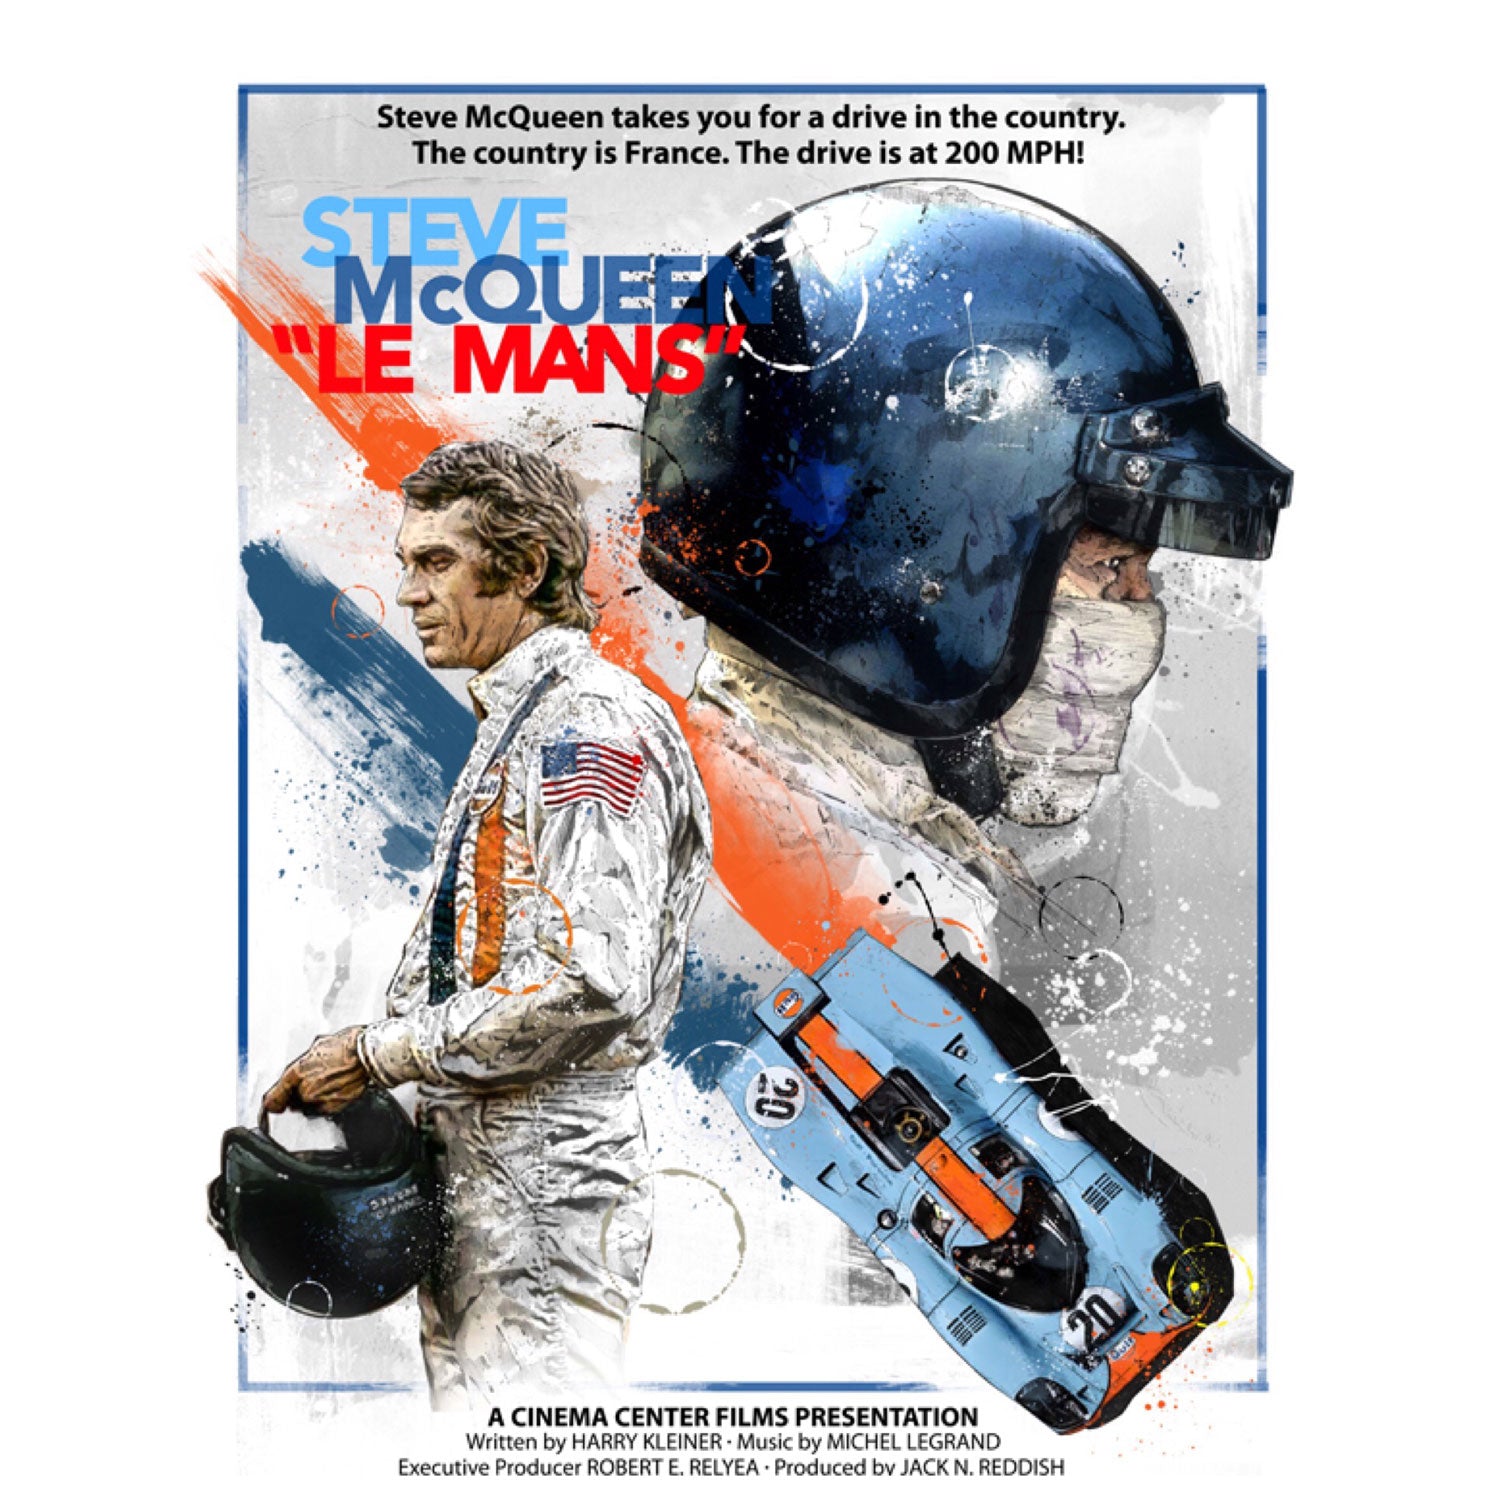 Steve McQueen "Le Mans" Limited Edition Print by Art Rotondo